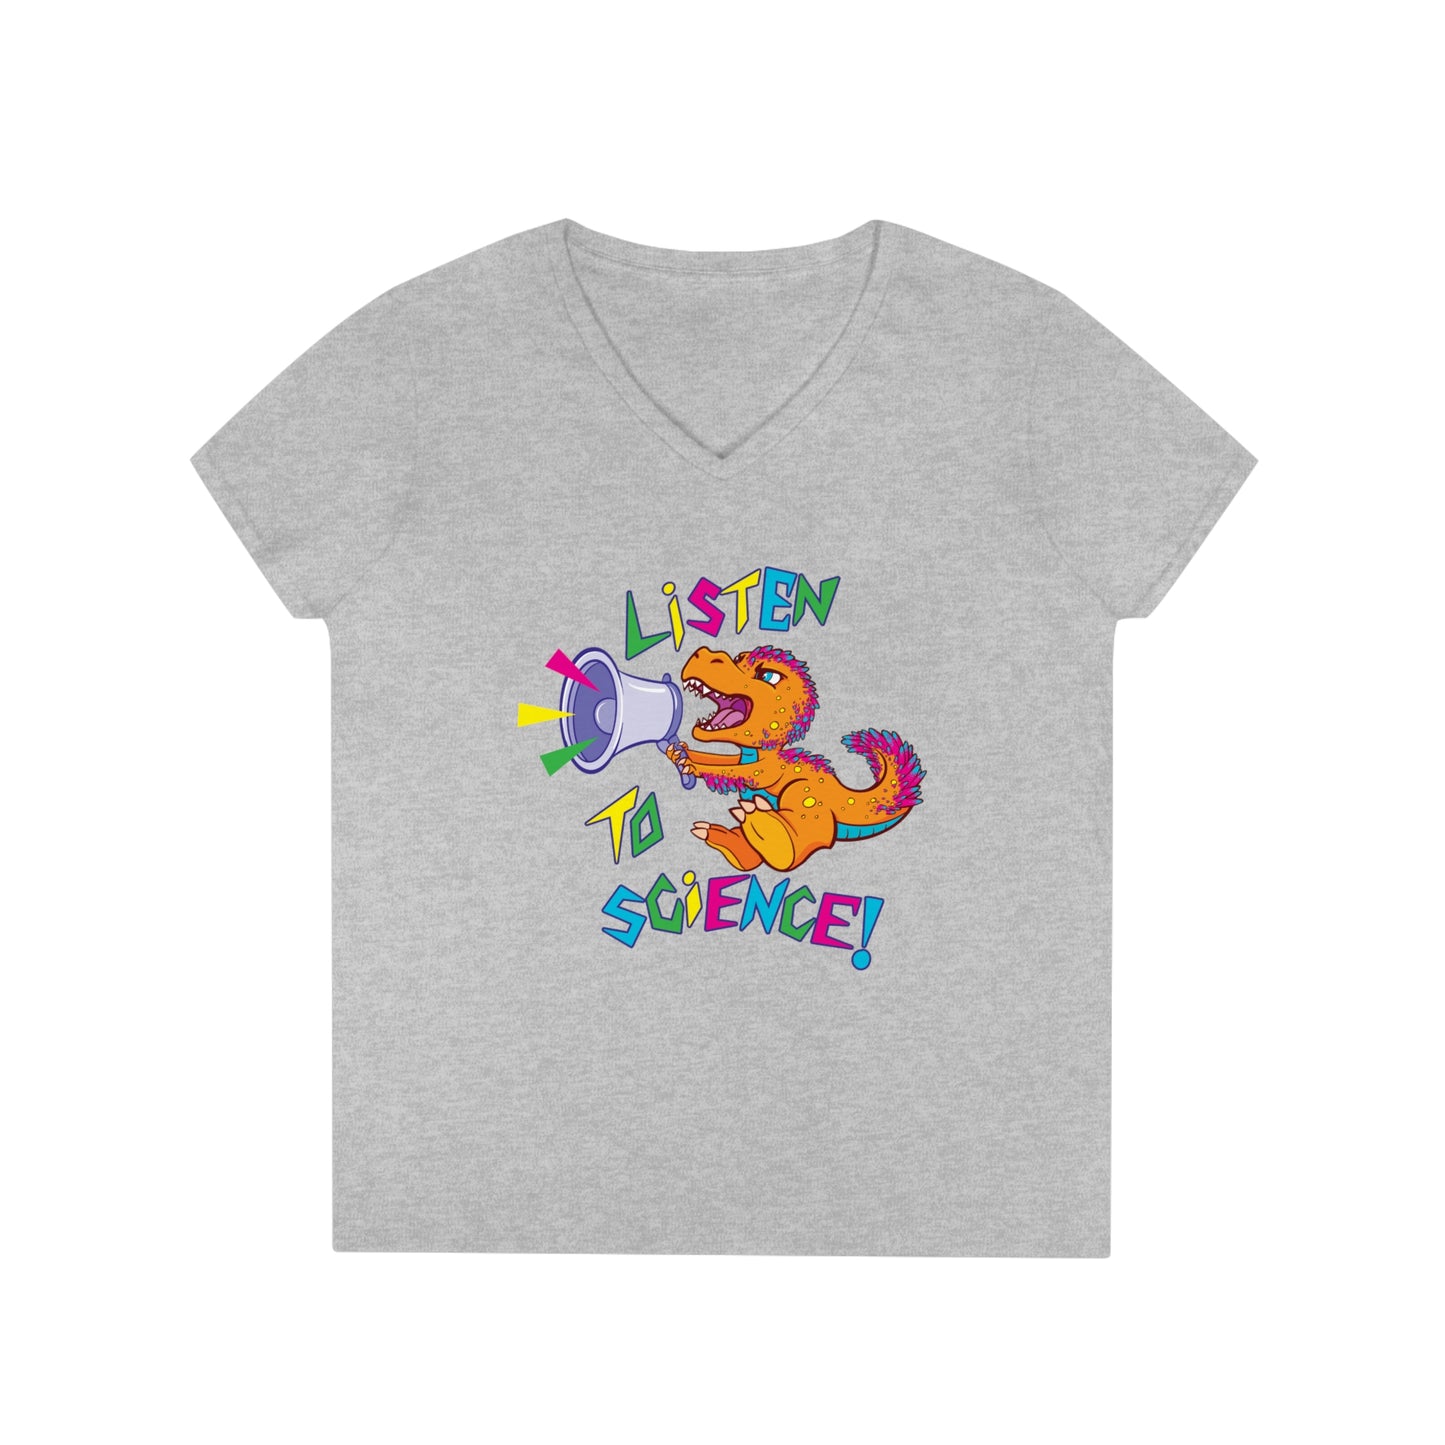 "Listen to Science" Ladies' V-Neck T-Shirt